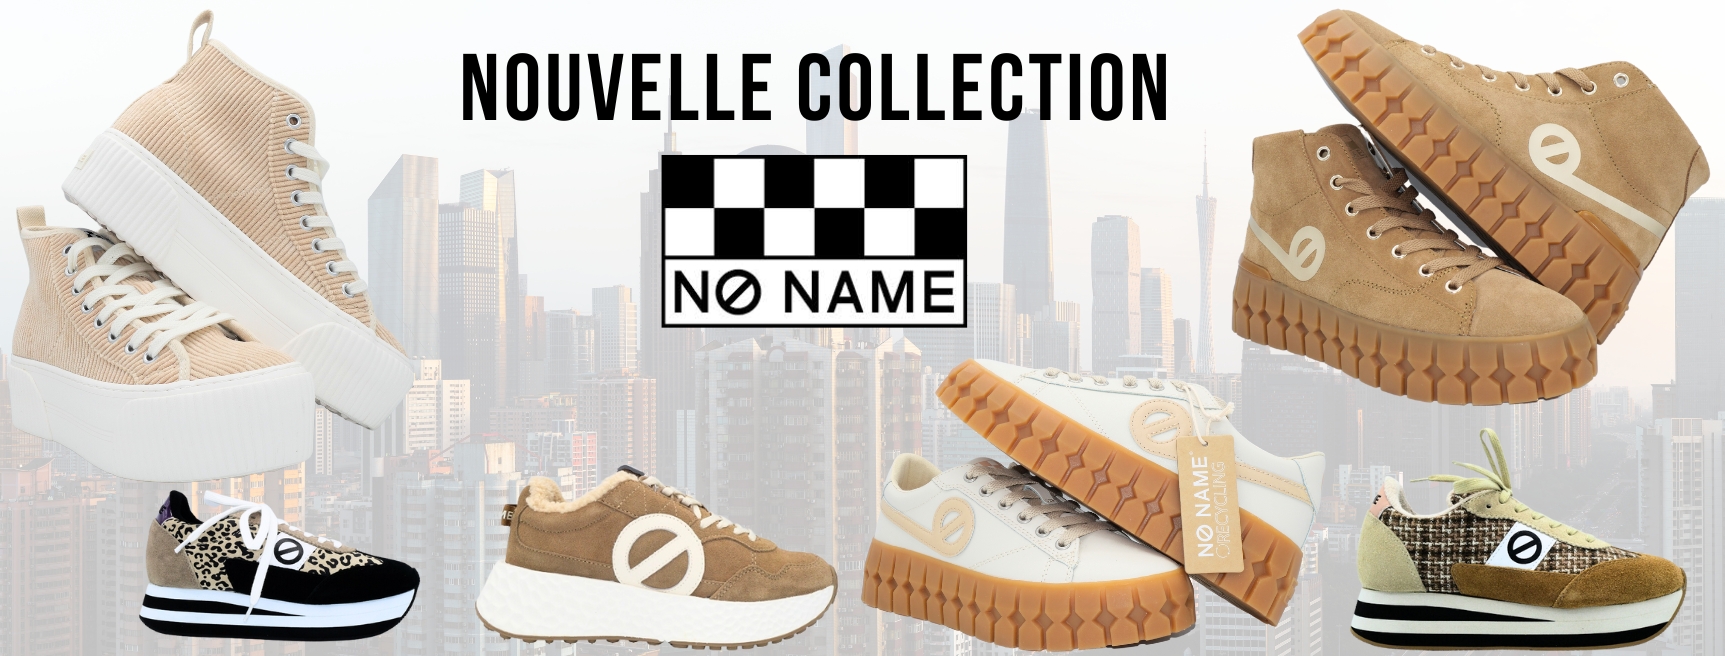 NOUVELLE COLLECTION HIVER 2023 NO NAME SHOES